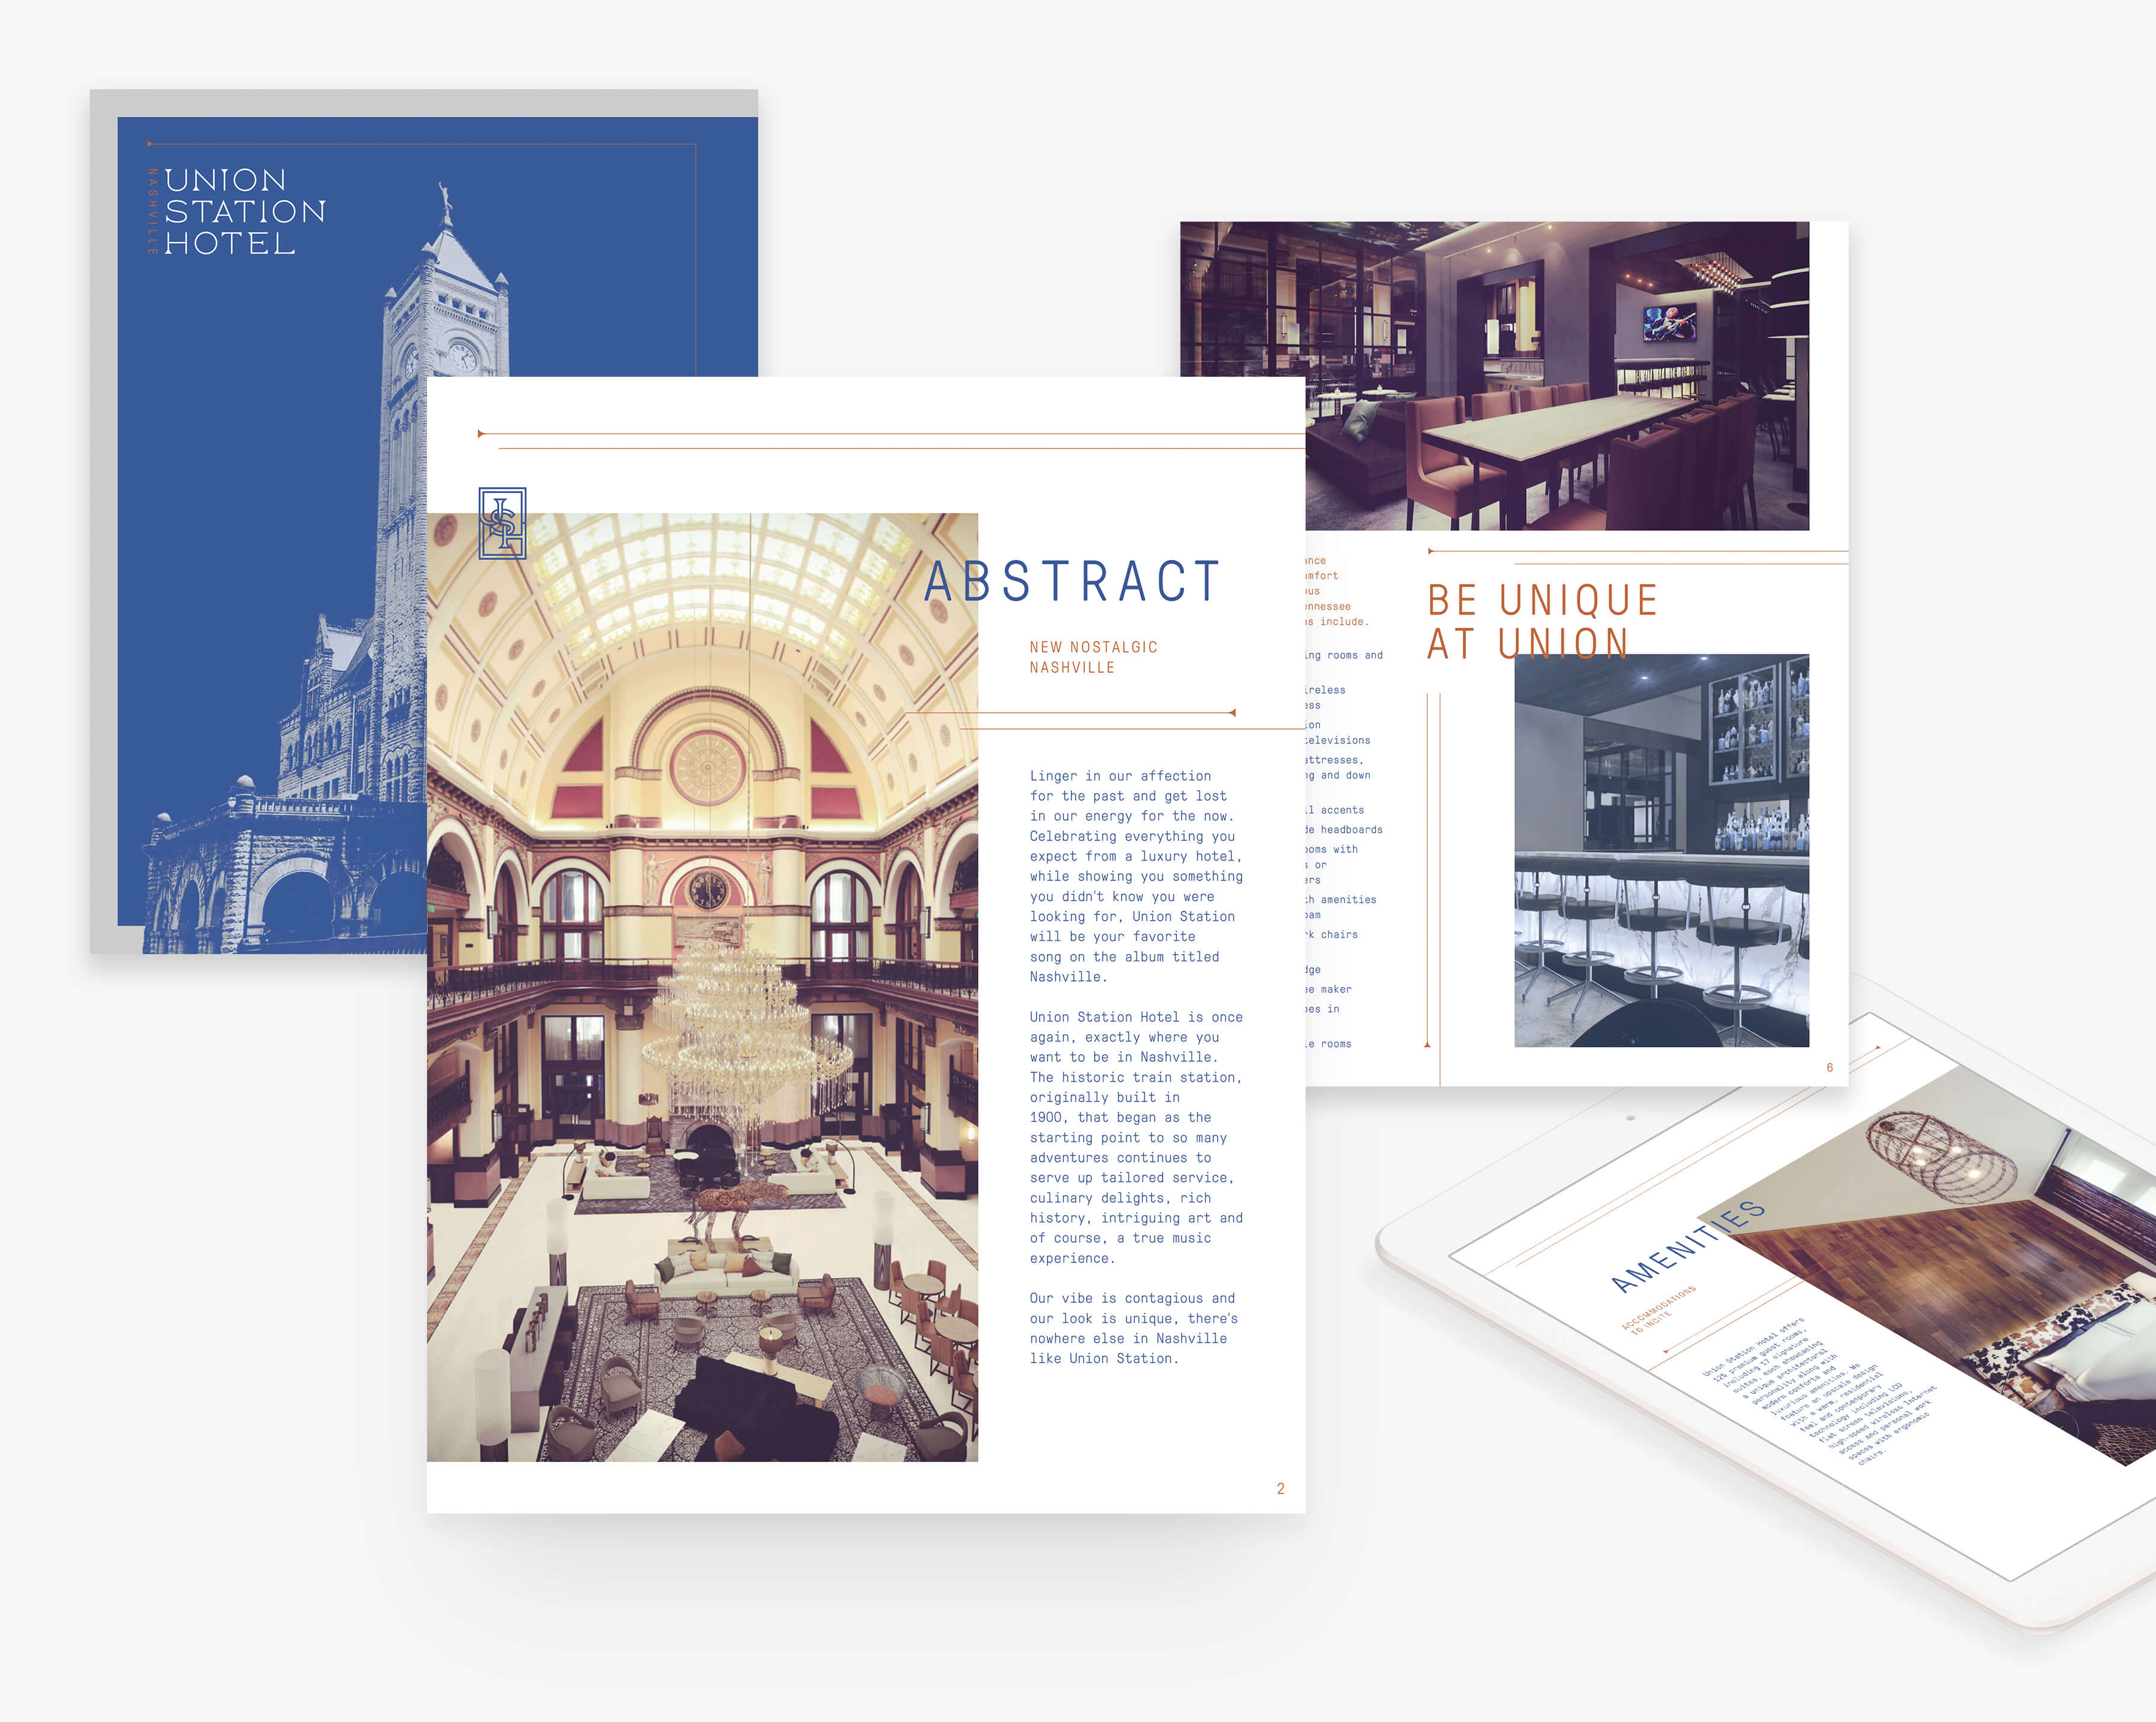 Select pages out of the Digital Press Kit PDF for the Union Station Hotel.